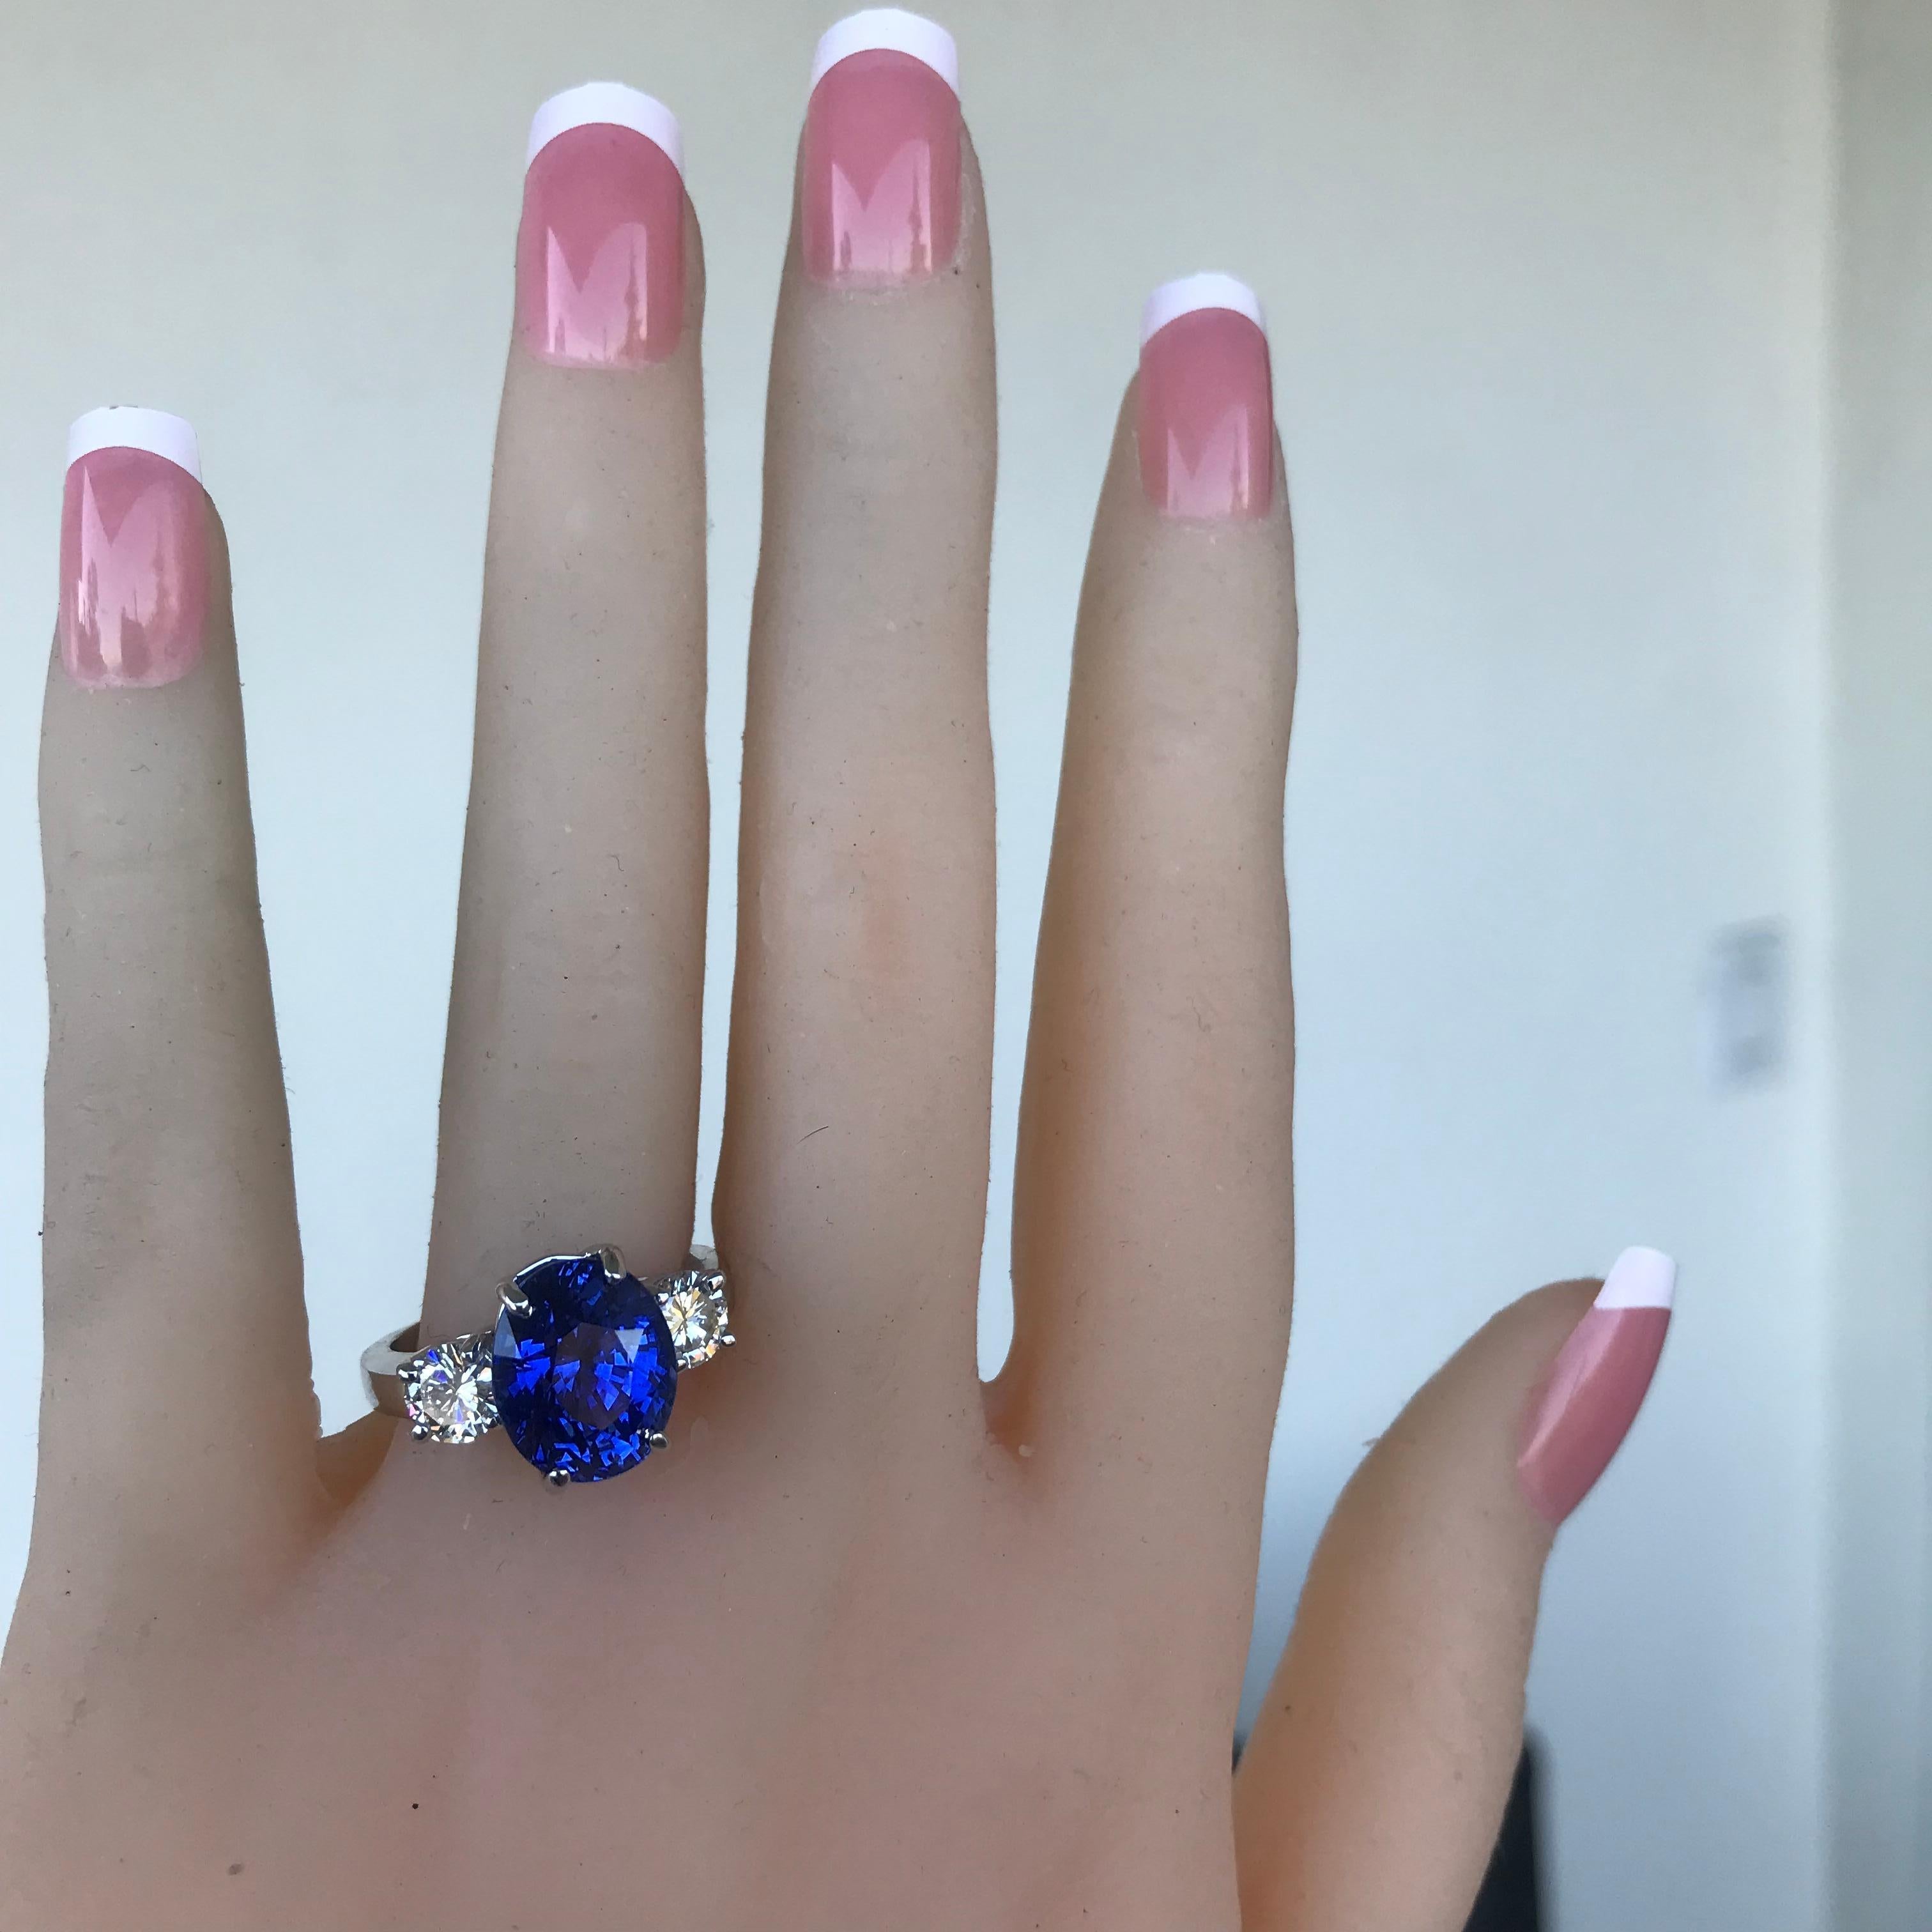 B464005

7.39 Carat Blue Sapphire 3 Stone Diamond Ring.

1. Carat Weight: 7.39 Carat Sapphire

2. Color: Intense Royal Blue

3. Tone:  Medium - 7.5 Out of 10, any higher will be over dark and any lower will be too light.

4. Hue: Vivid Medium